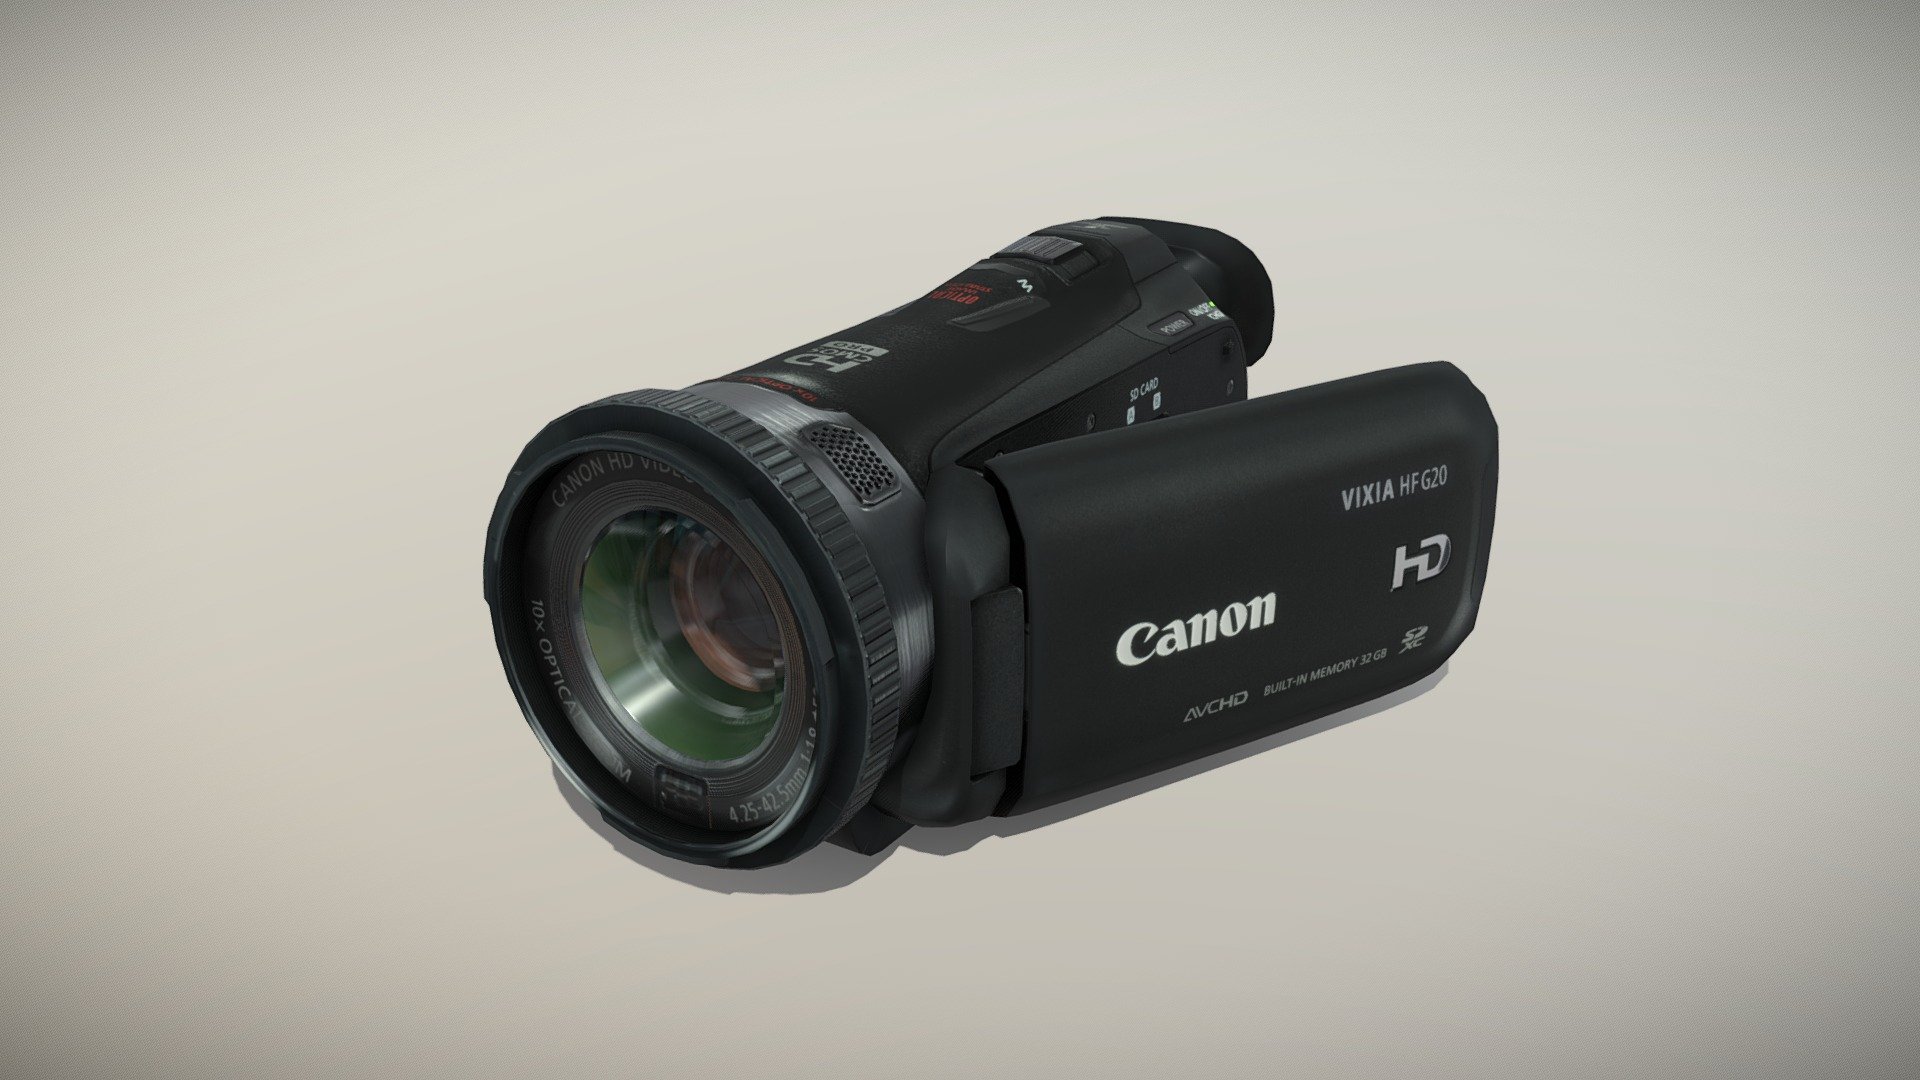 •   Let me present to you high-quality low-poly 3D model Canon Vixia HF G20 Black. Modeling was made with ortho-photos of real camcorder that is why all details of design are recreated most authentically.

•    This model consists of a few meshes, it is low-polygonal and it has three materials (Body, Strap and Glass Lens).

•   The total of the main textures is 7. Resolution of all textures is 4096 pixels square aspect ratio in .png format. Also there is original texture file .PSD format in separate archive.

•   Polygon count of the model is – 5747.

•   The model has correct dimensions in real-world scale. All parts grouped and named correctly.

•   To use the model in other 3D programs there are scenes saved in formats .fbx, .obj, .DAE, .max (2010 version).

Note: If you see some artifacts on the textures, it means compression works in the Viewer. We recommend setting HD quality for textures. But anyway, original textures have no artifacts 3d model